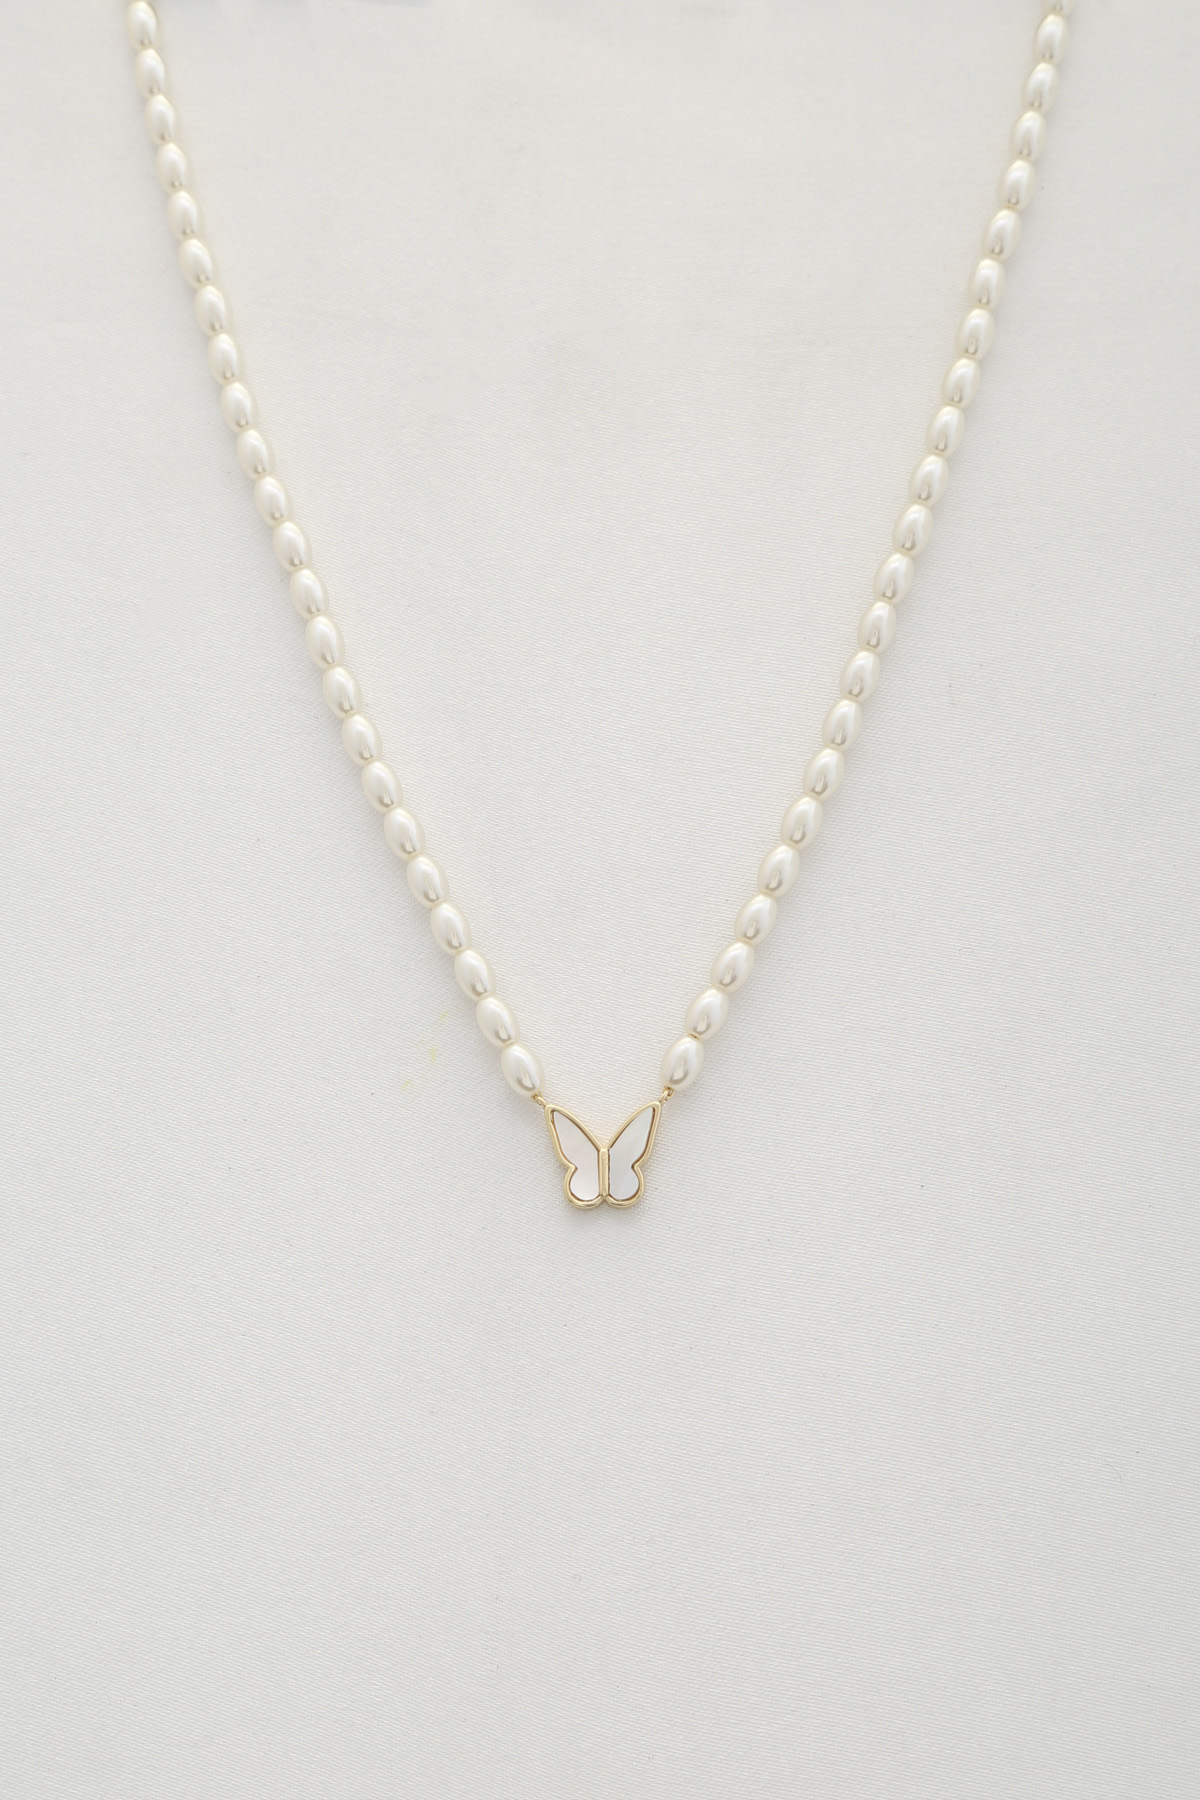 BUTTERFLY CHARM FRESH WATER PEARL NECKLACE